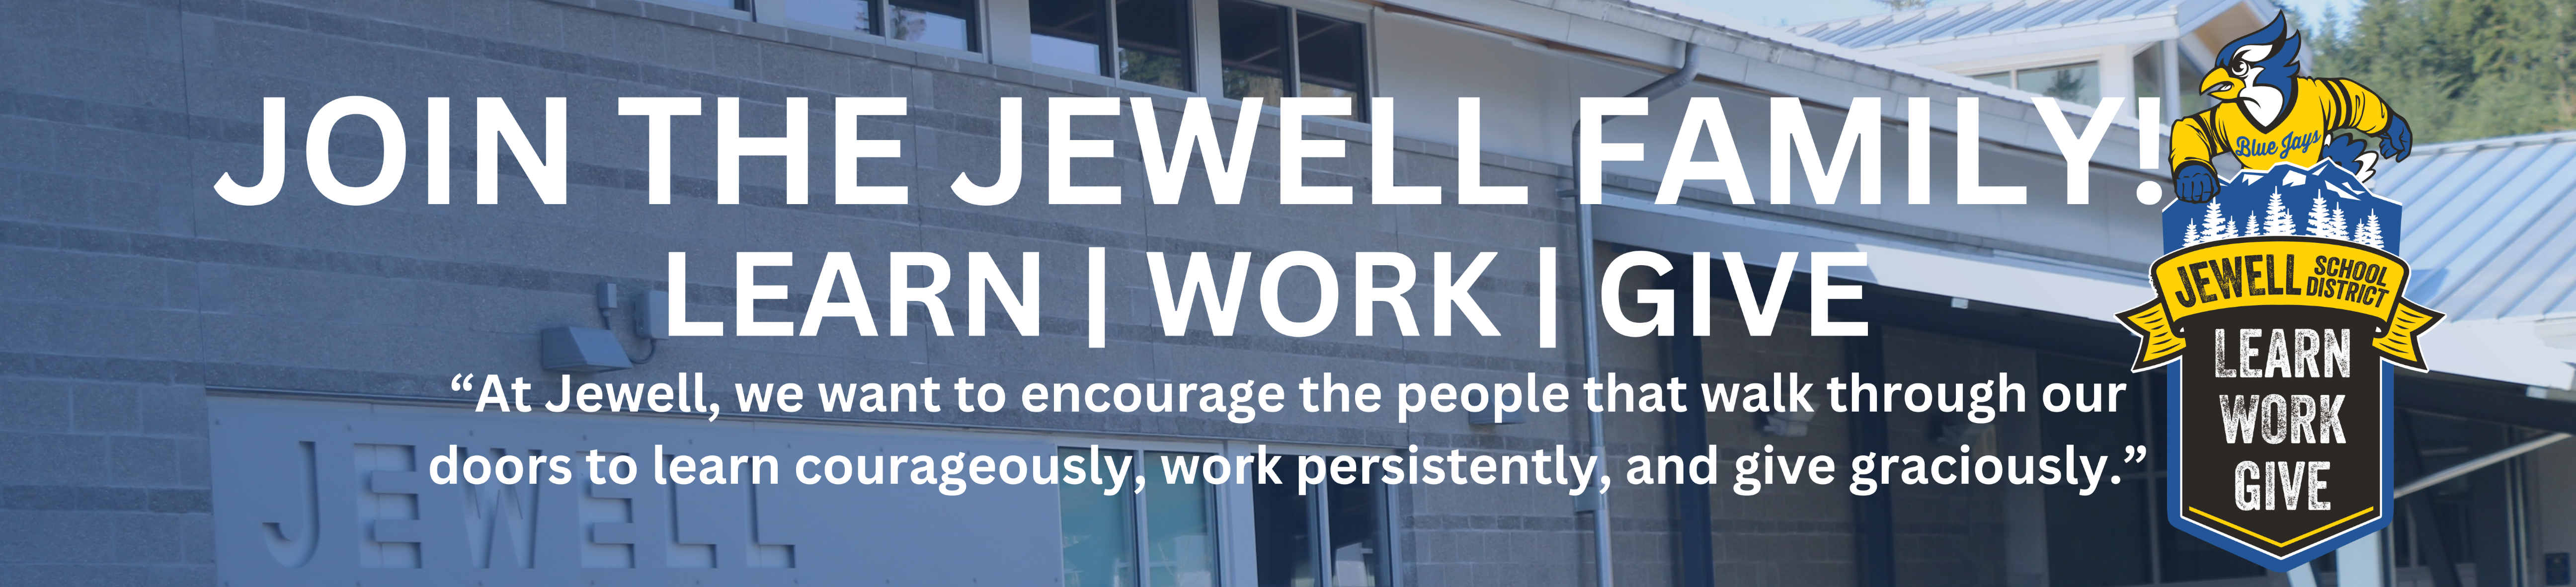 Jewell school district. Join THE Jewell family. At Jewell, we want to encourage the people that walk through our doors to learn courageously, work persistently, and give graciously.